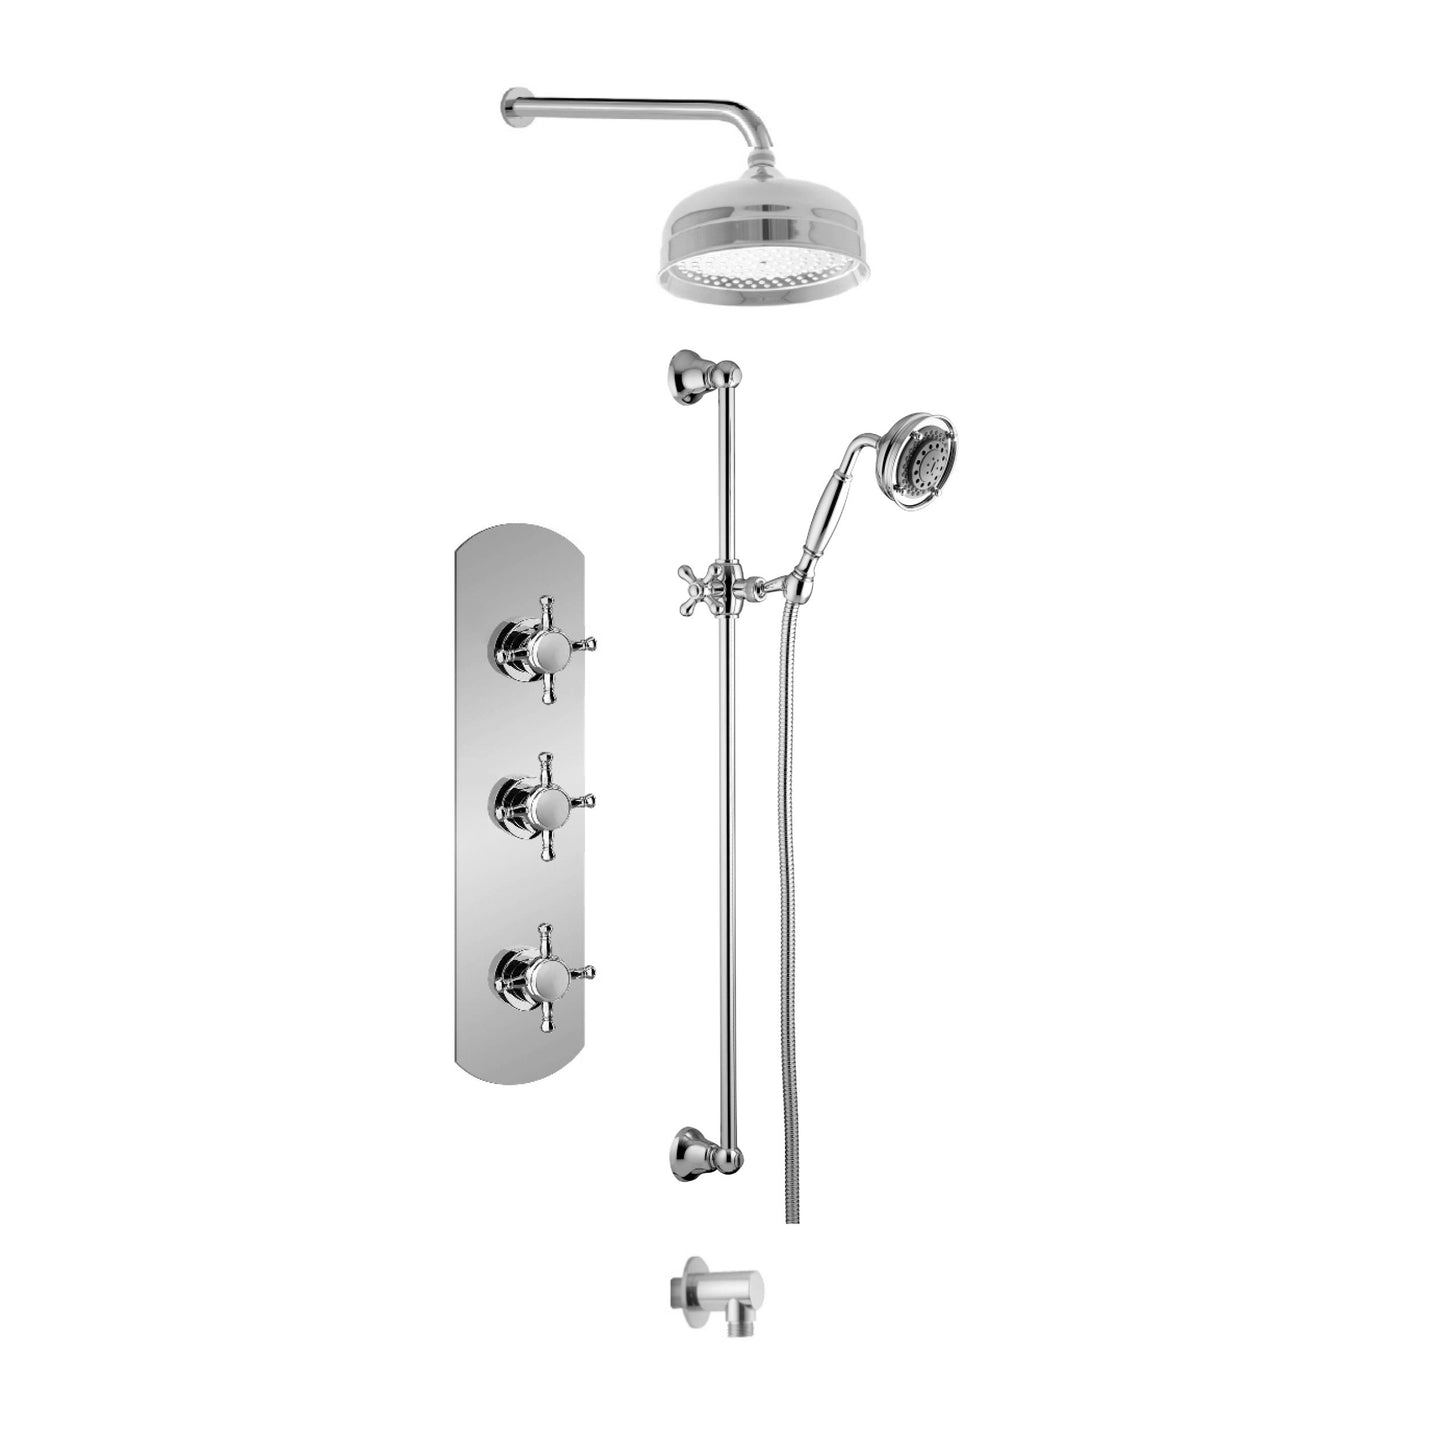 Aquadesign Products Shower Kit (Queen 3711QX) - Chrome